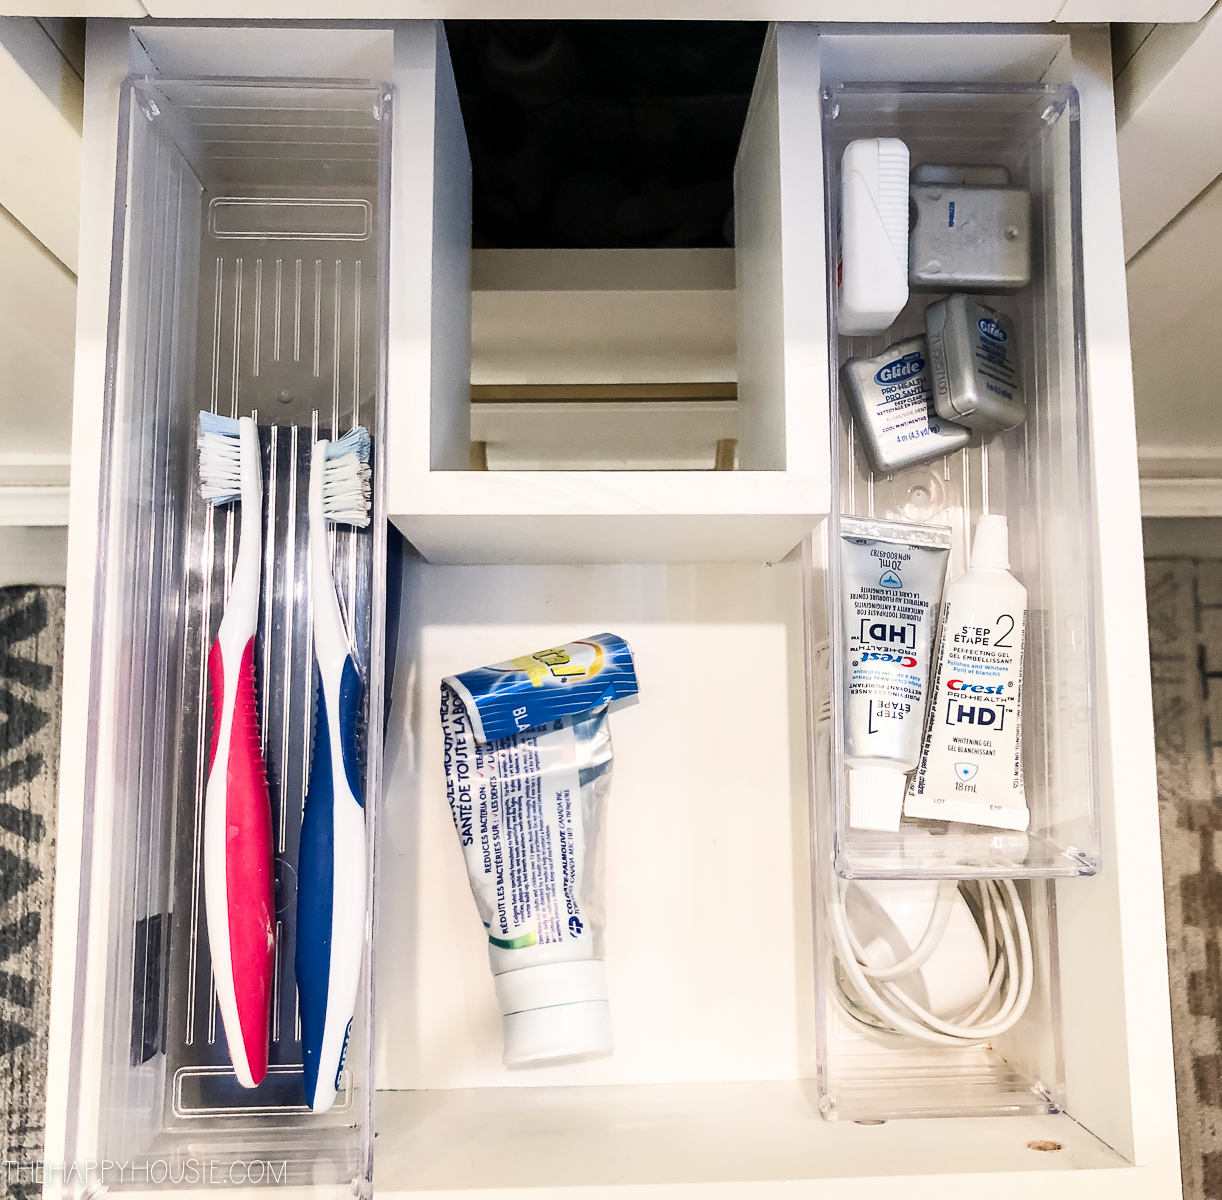 Opening the drawer in the bathroom revealing toothbrushes and floss.